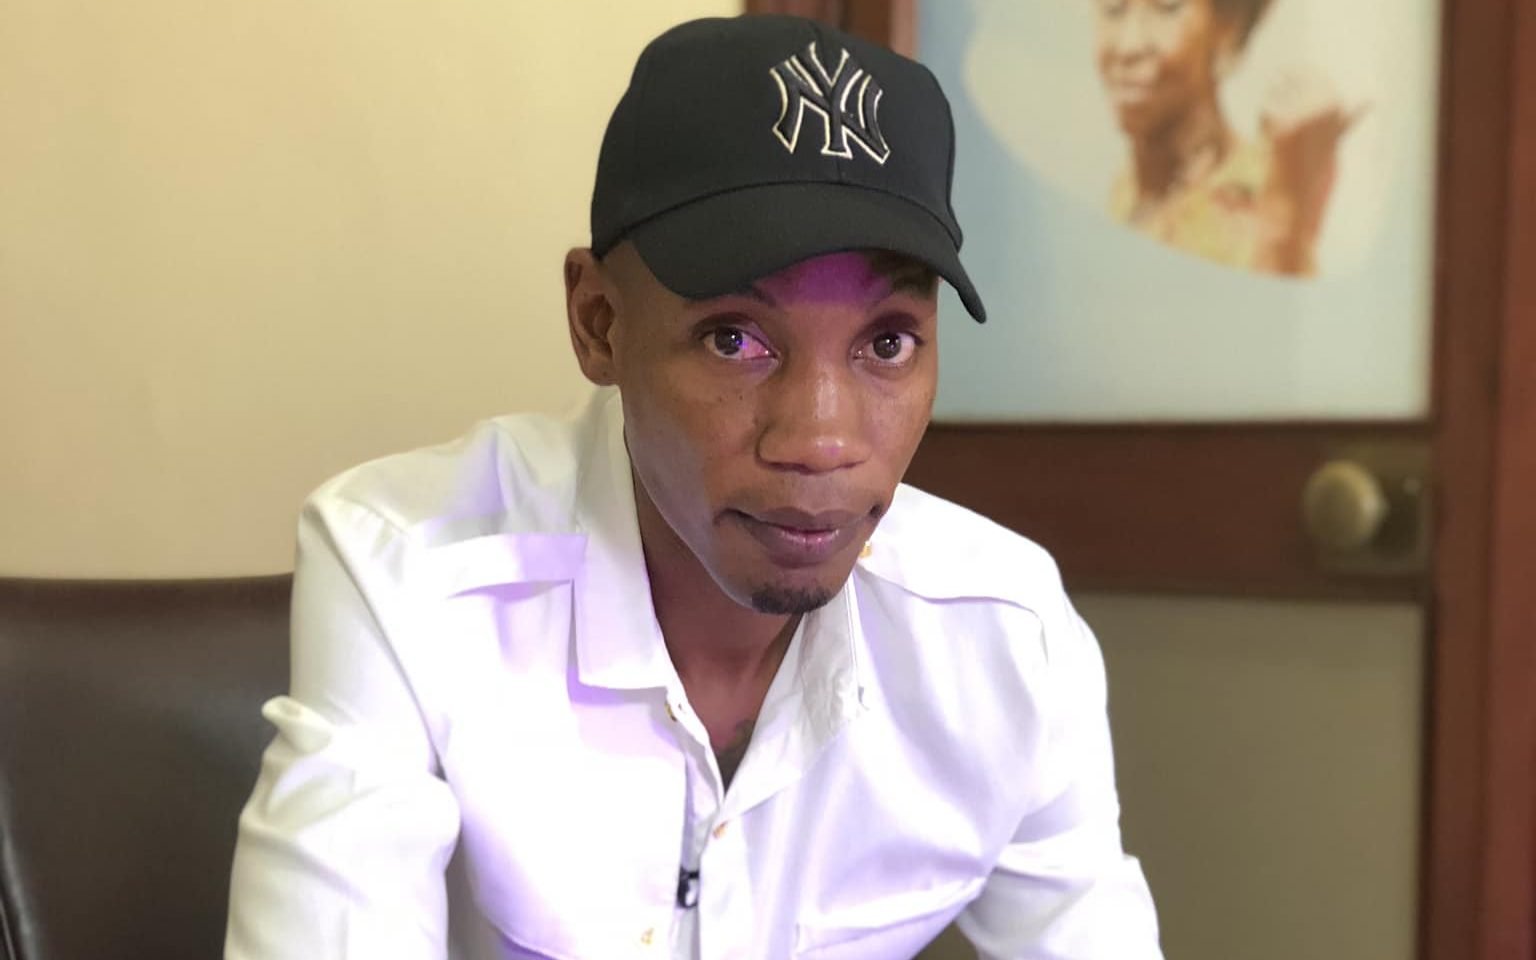 bryan-white-to-address-media-after-three-year-absence-from-uganda